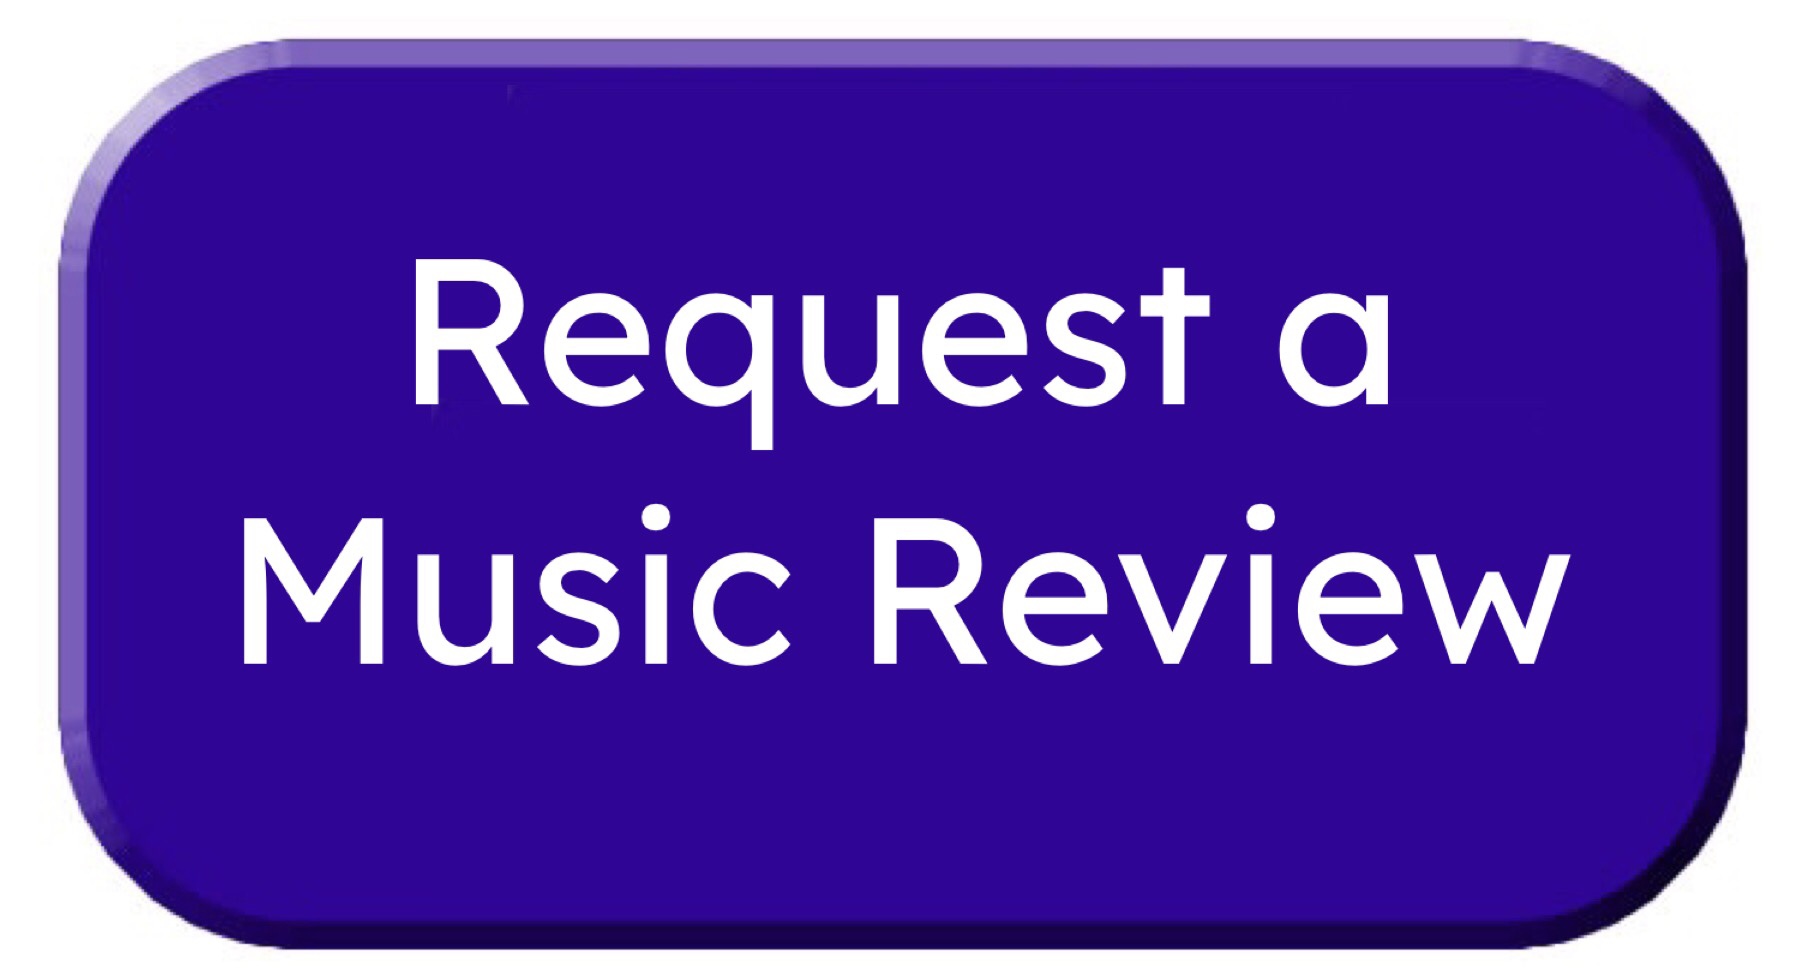 Request a Music Review